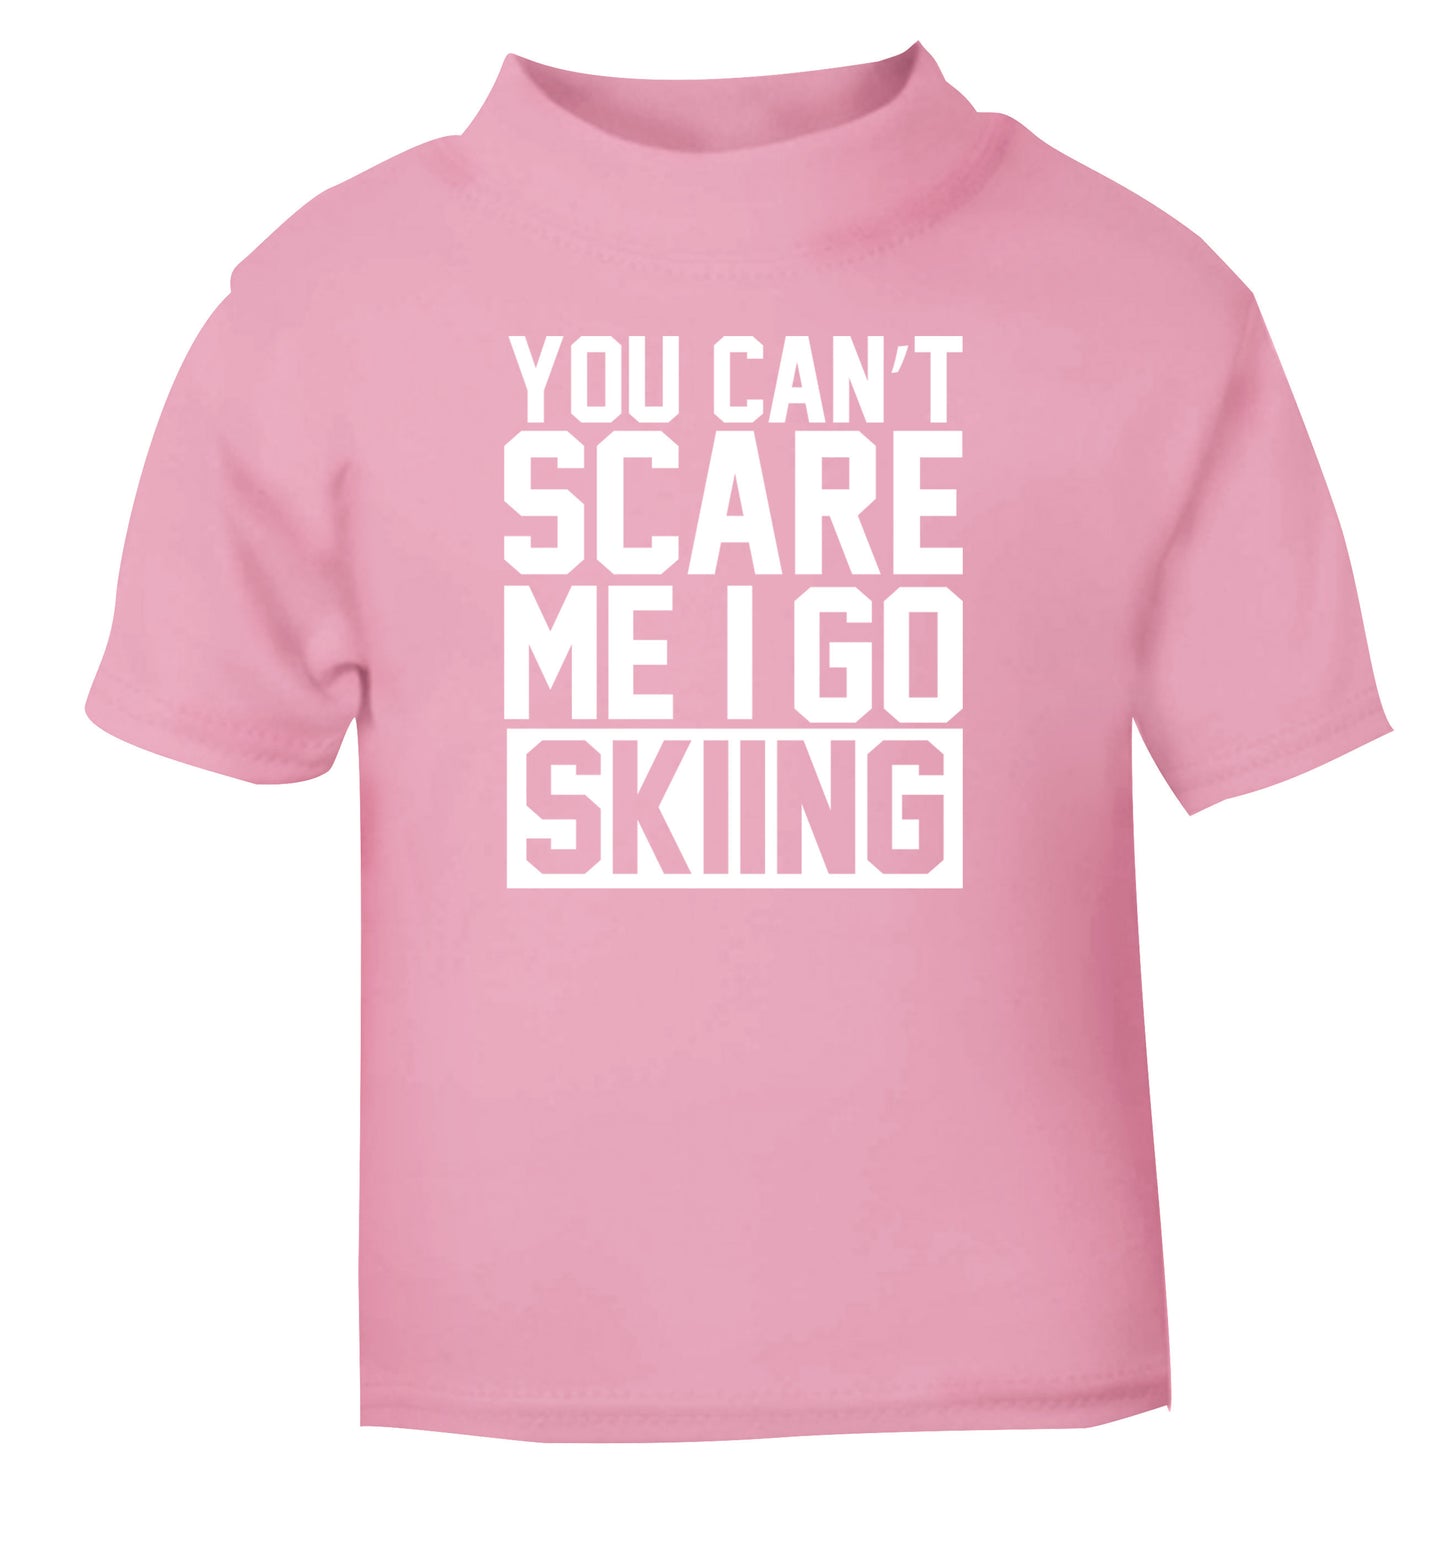 You can't scare me I go skiing light pink Baby Toddler Tshirt 2 Years